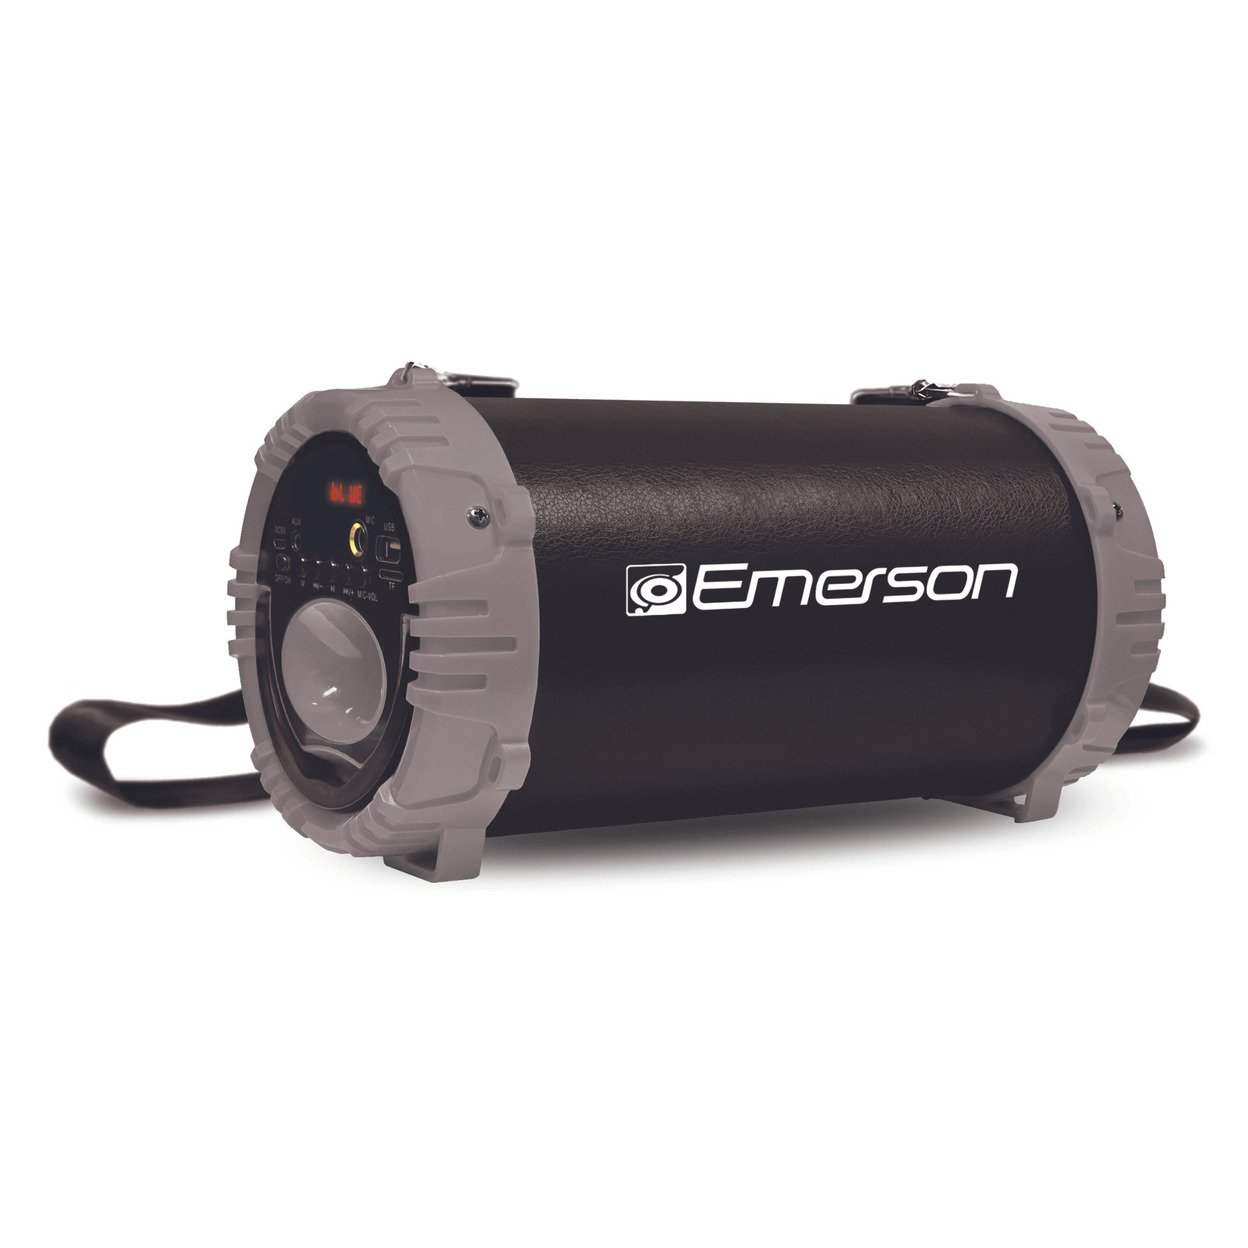 Emerson Portable Bluetooth Speaker With LED Lighting And Carrying Strap - Grey